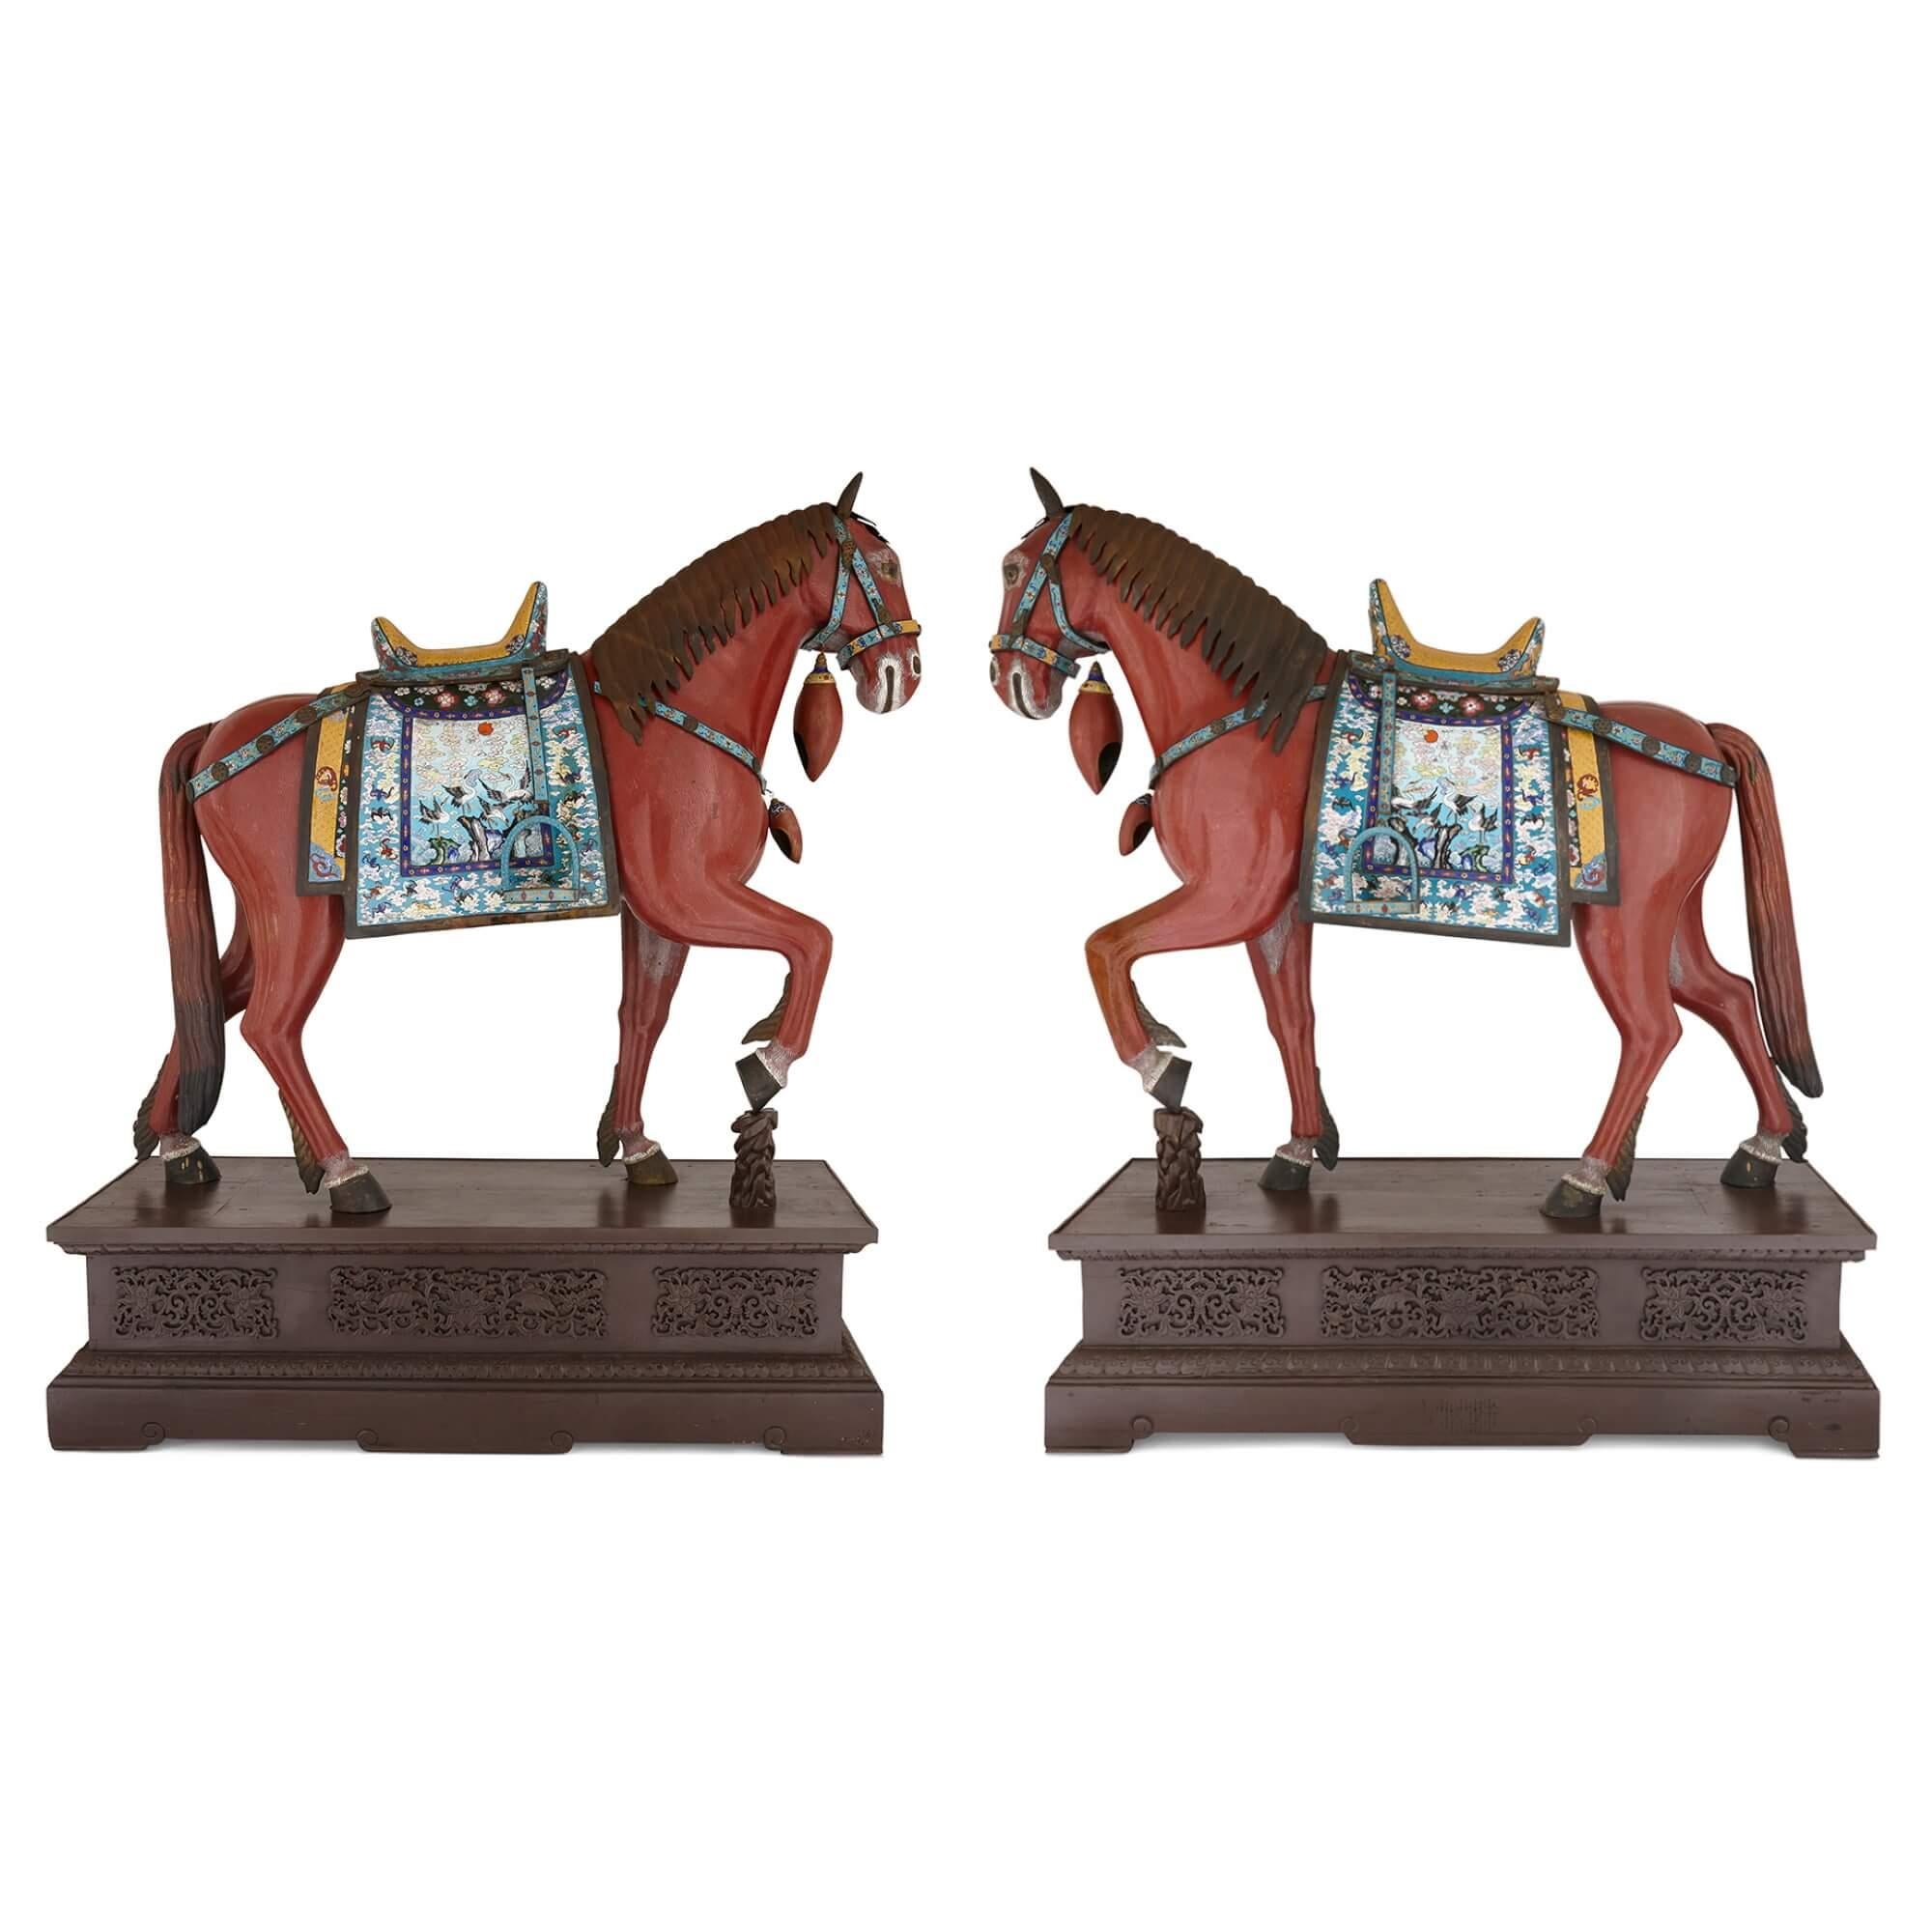 Large pair of Chinese cloisonné enamel horse sculptures 
Chinese, Early 20th Century
Horses: Height 159cm, width 185cm, depth 71cm
Bases: Height 48cm, width 174cm, depth 69cm 
Both: Height 207cm, width 185cm, depth 71cm

Executed in cloisonné